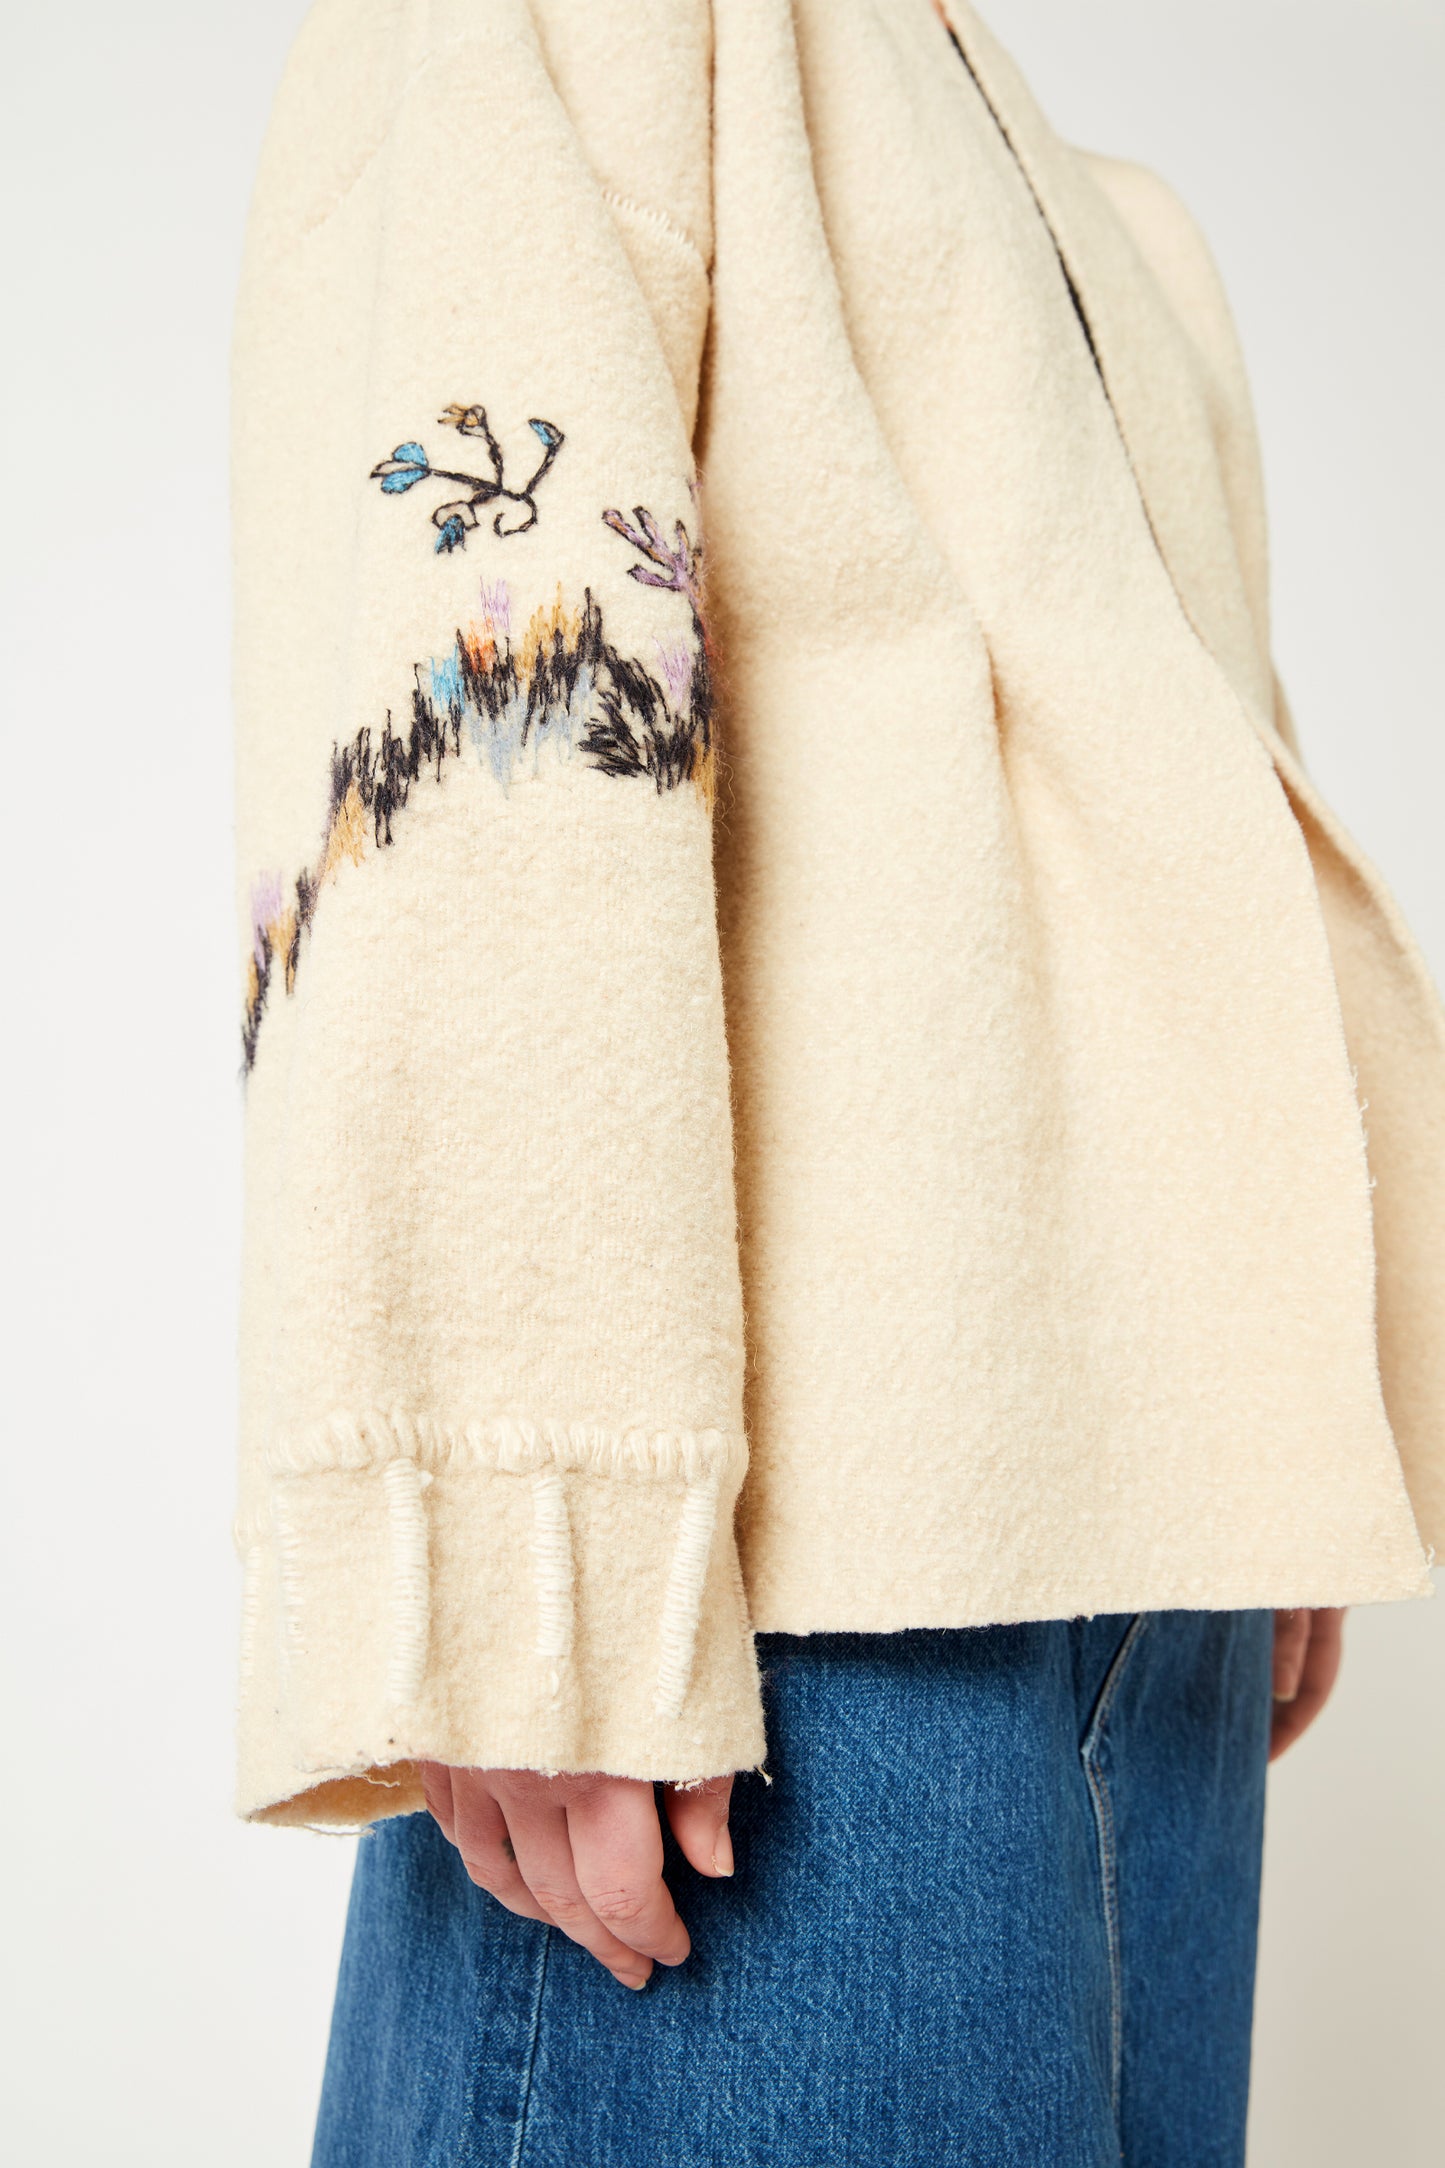 Embroidered Waisted Coat